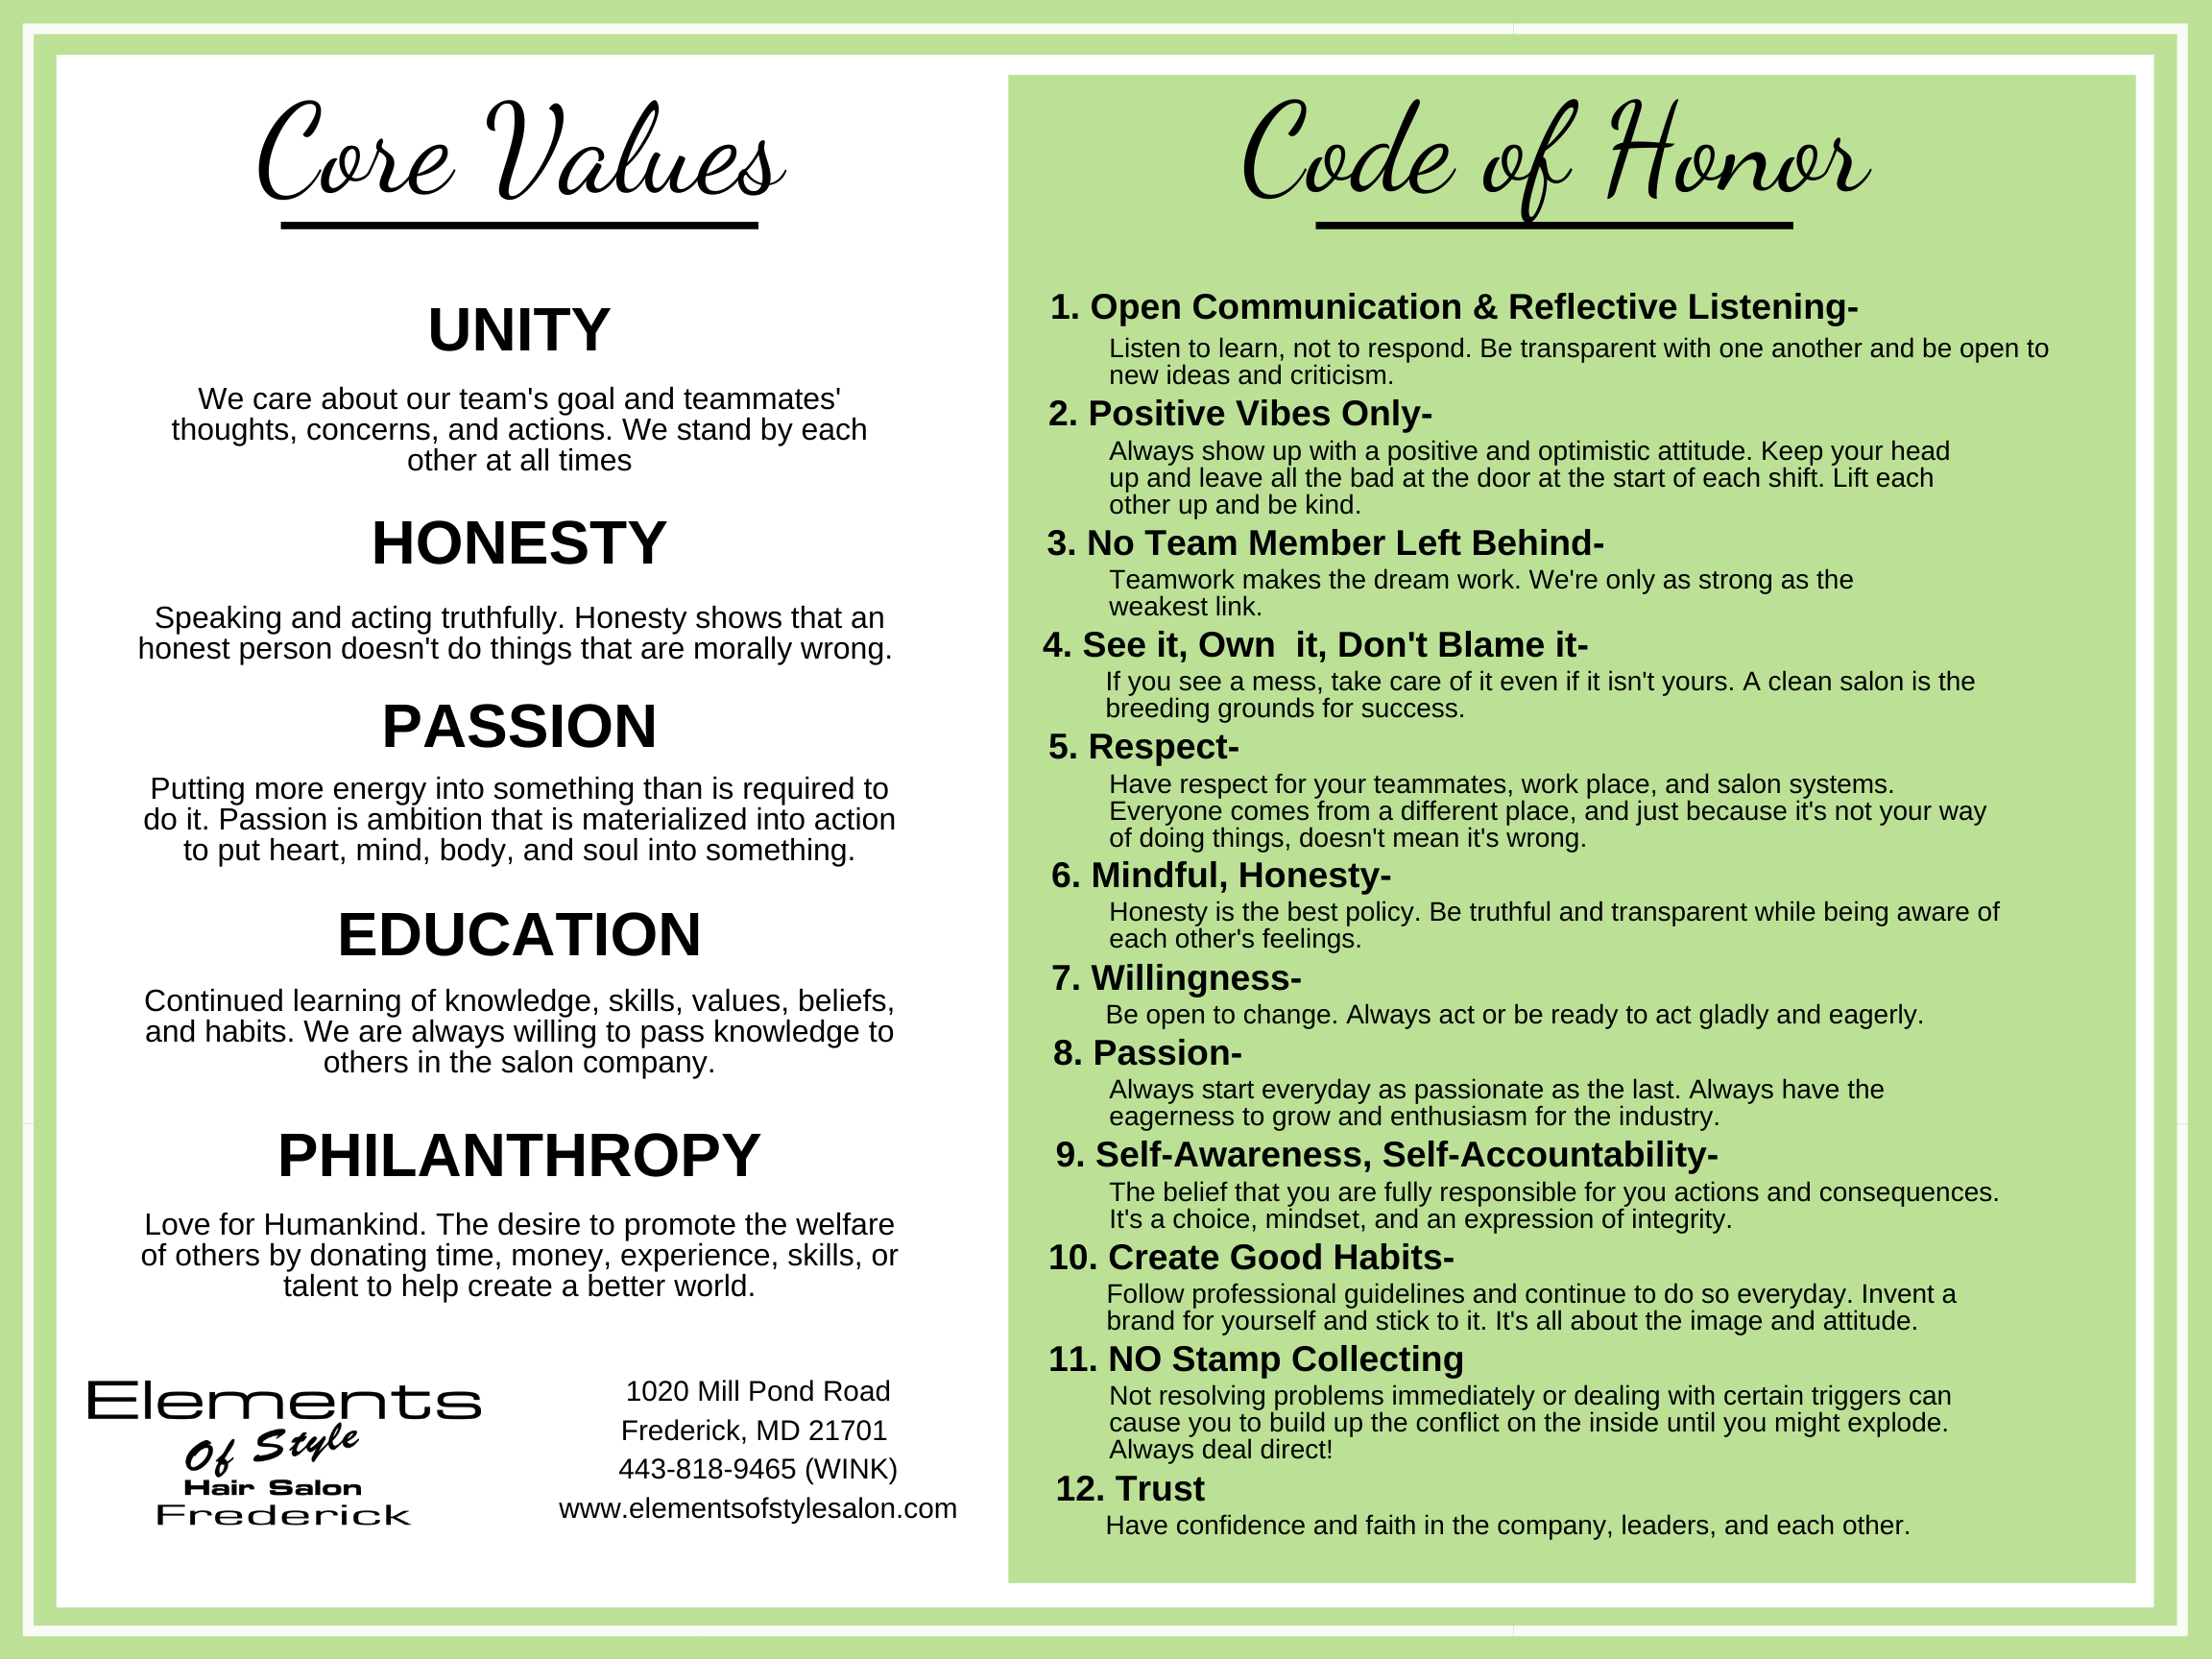 Frederick Code of Honor Poster - Elements of Style Salon